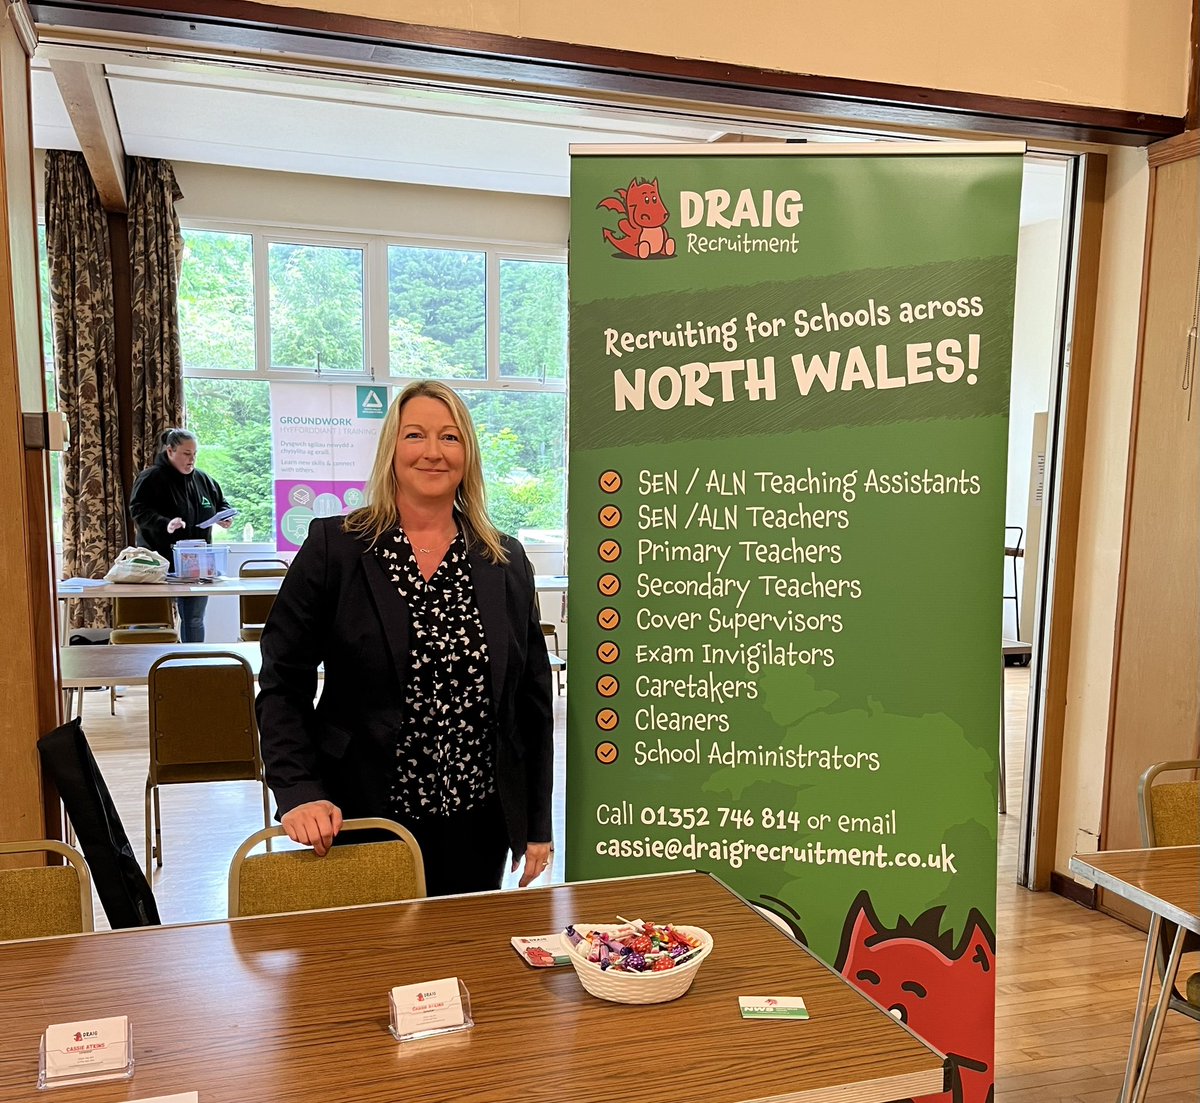 Wrexham War Memorial Hall, career event. It was great to connect with many job seekers today.

If you are a teacher or teaching assistant looking for work in North Wales or Chester contact us at info@draigrecruitment.co.uk
#NorthWalesSocial #northwalesjobs #chesterjobs